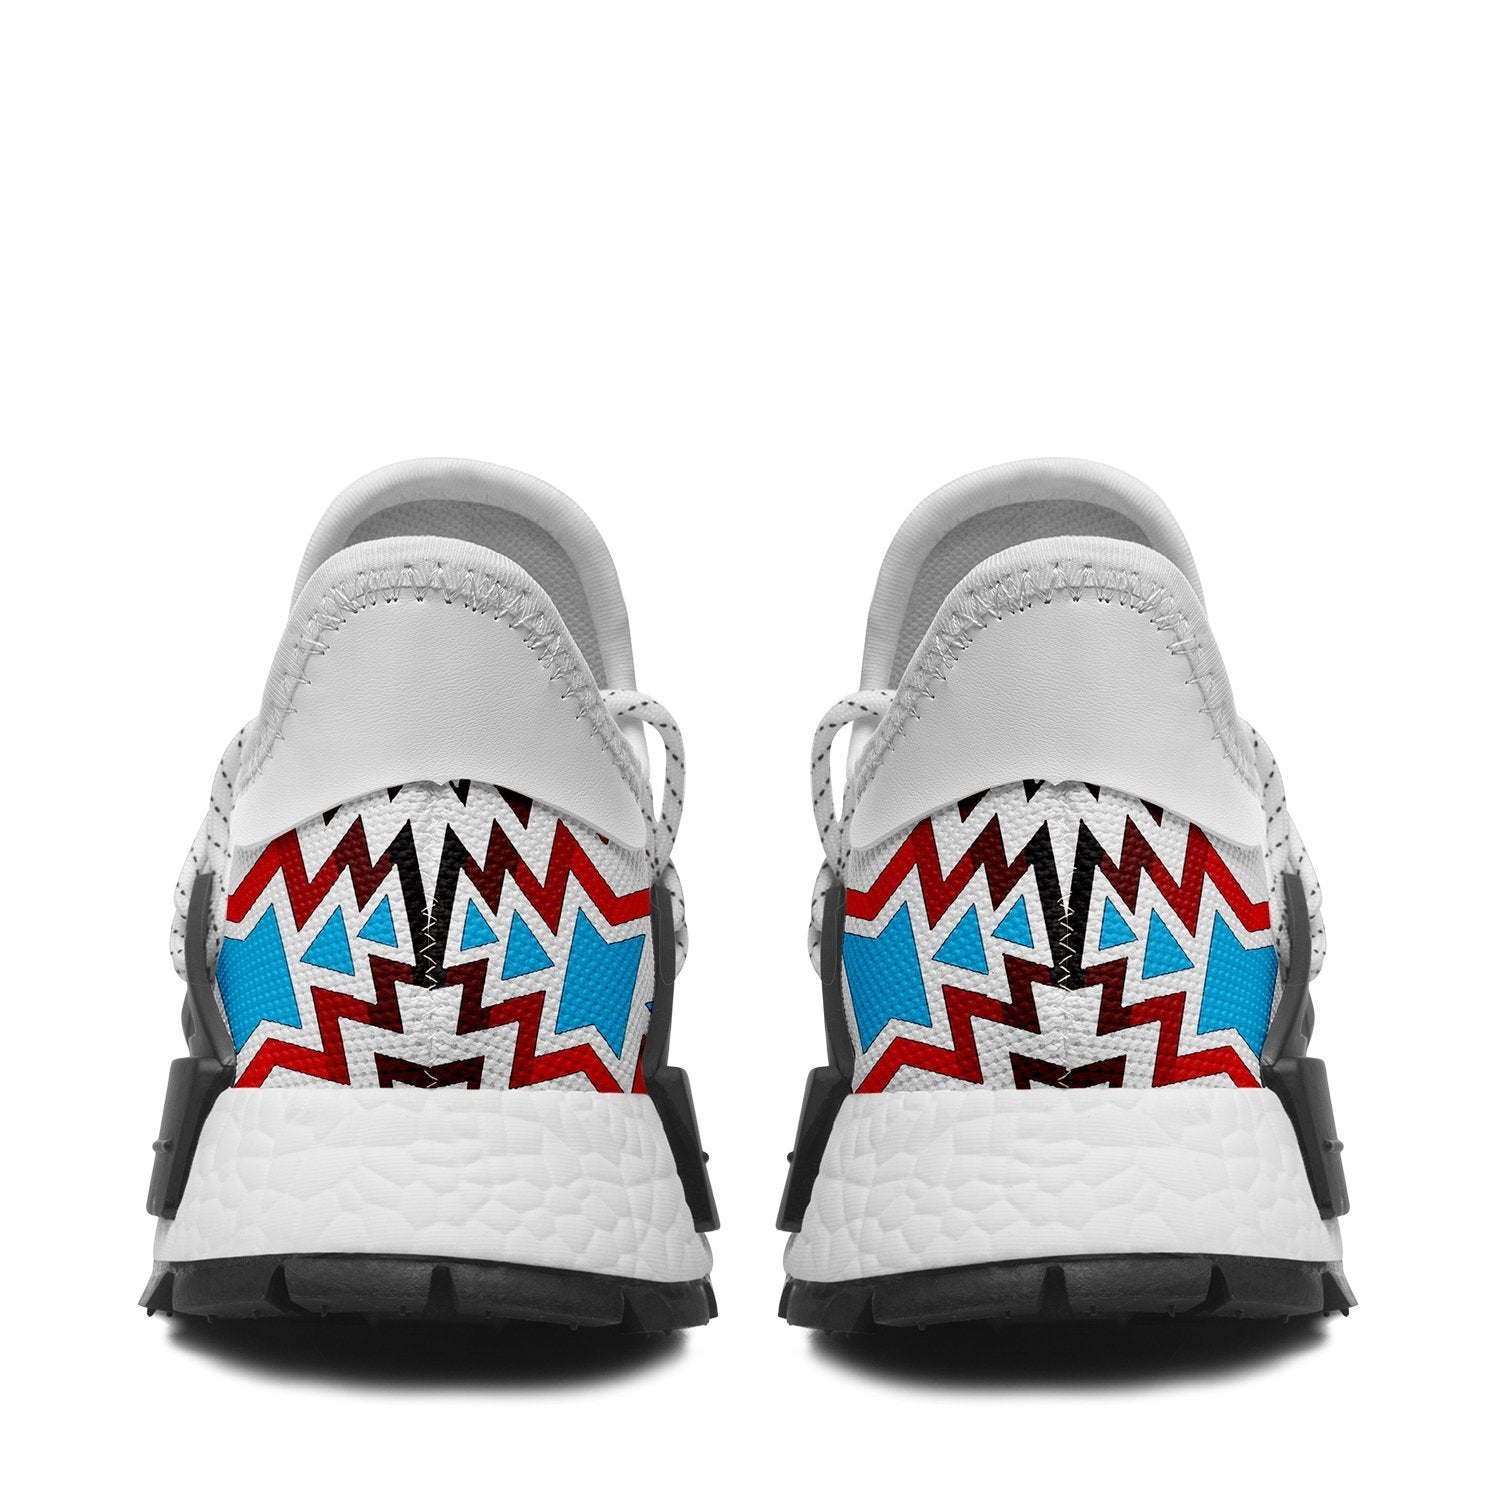 White Fire and Turquoise Okaki Sneakers Shoes 49 Dzine 